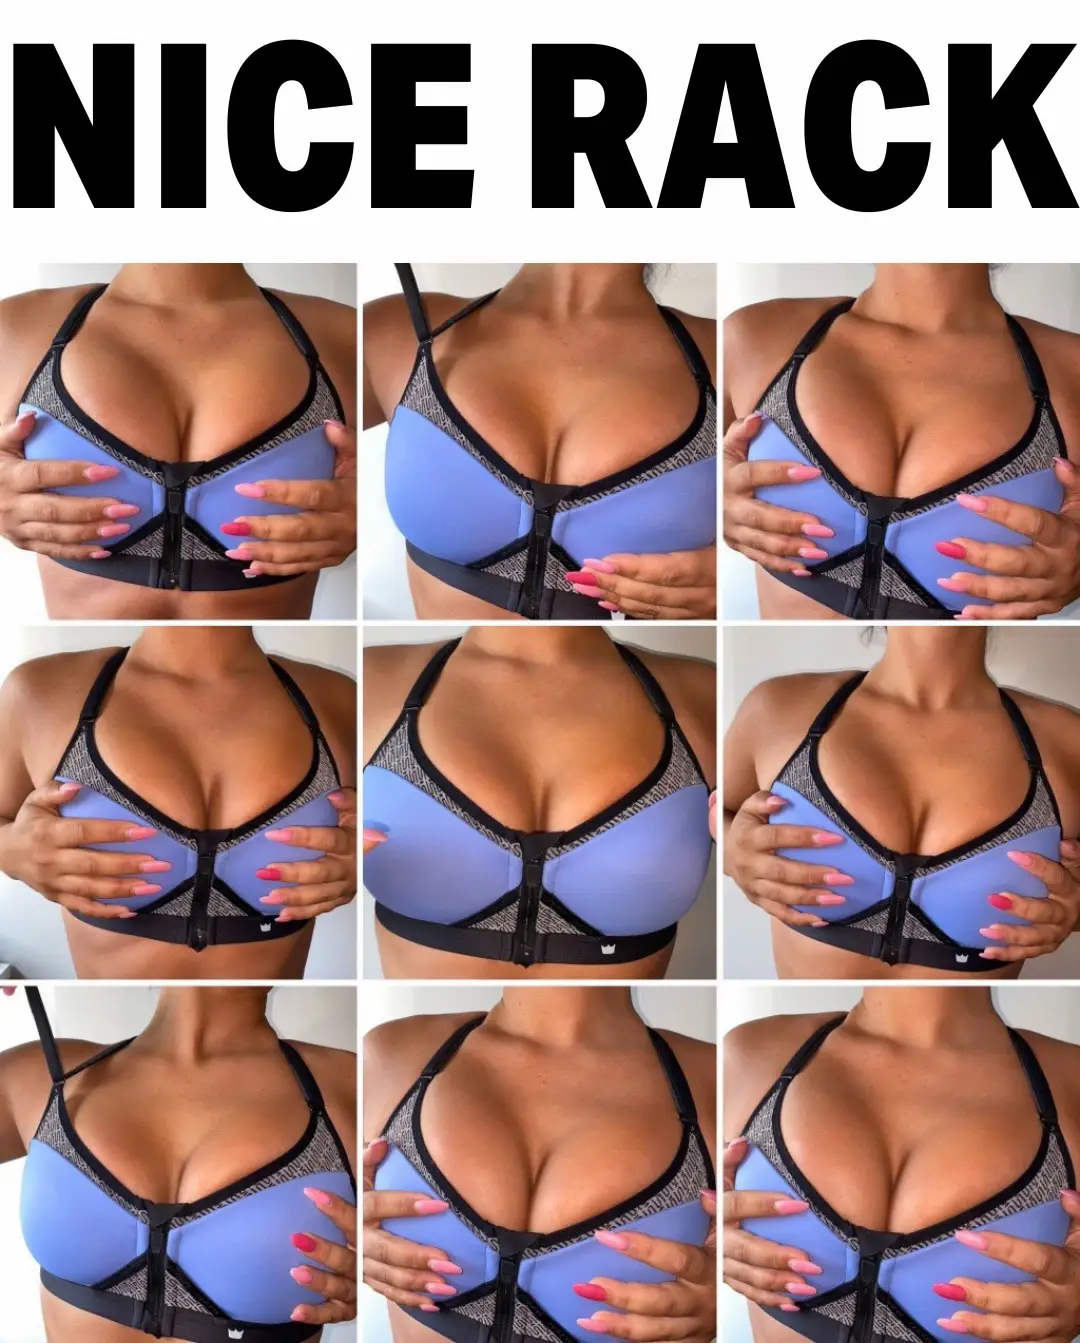 carol gross recommends nice rack pic pic